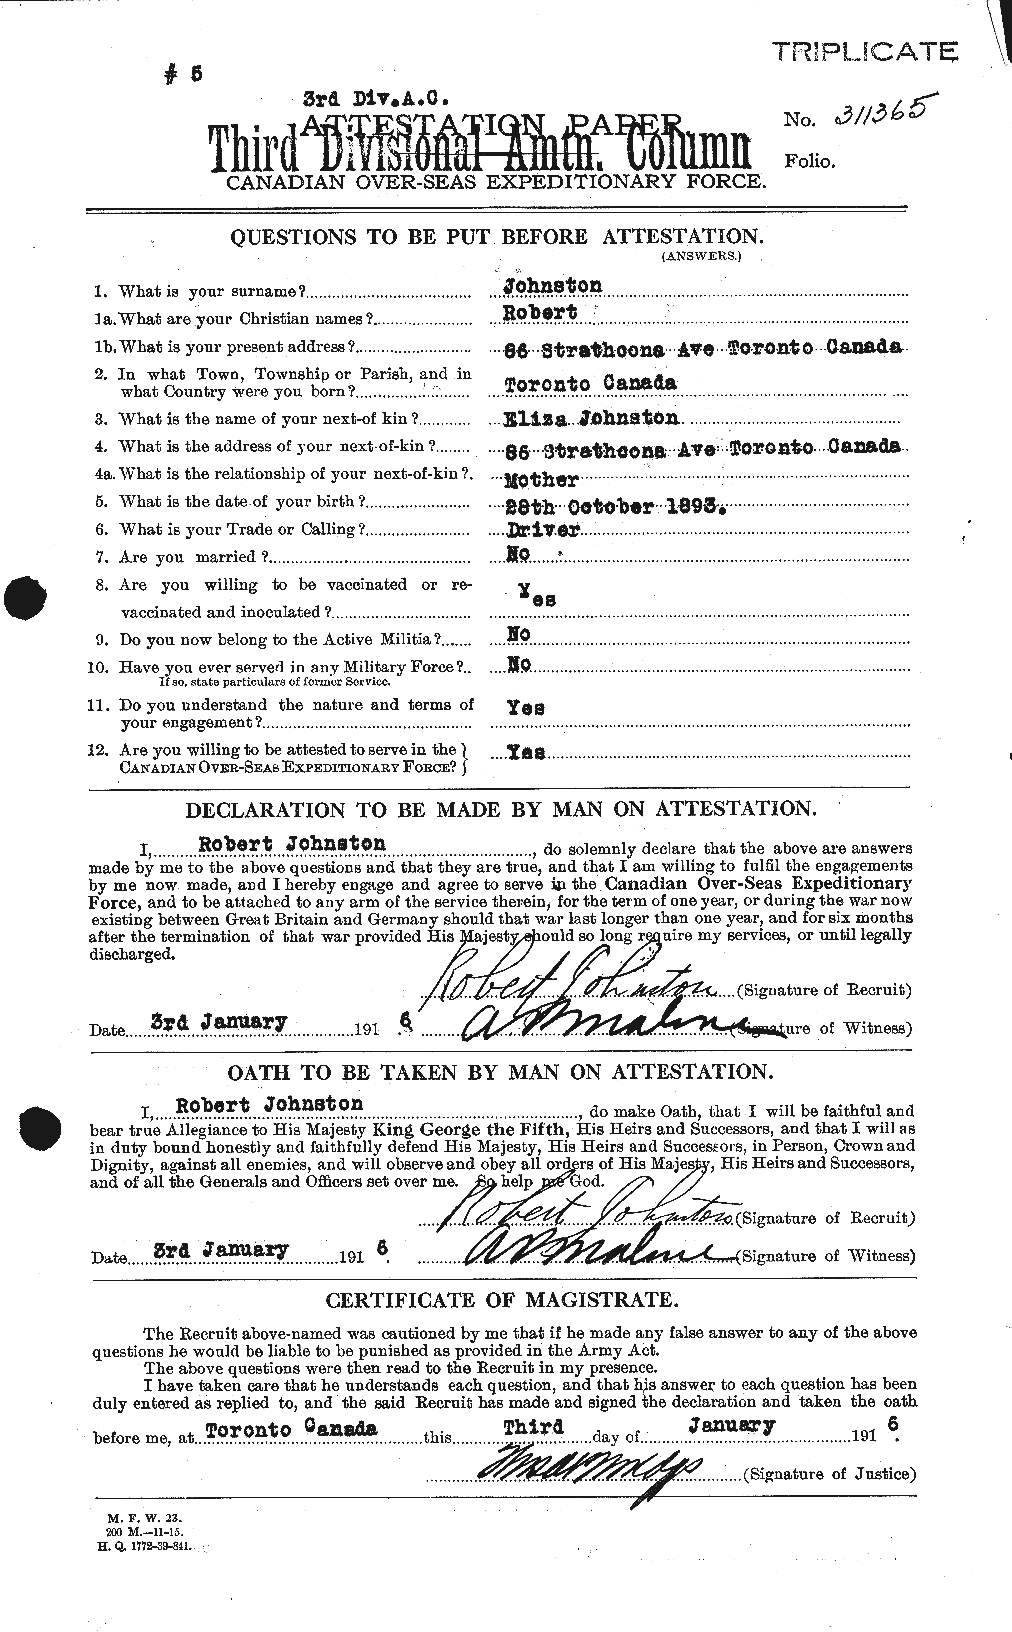 Personnel Records of the First World War - CEF 426998a